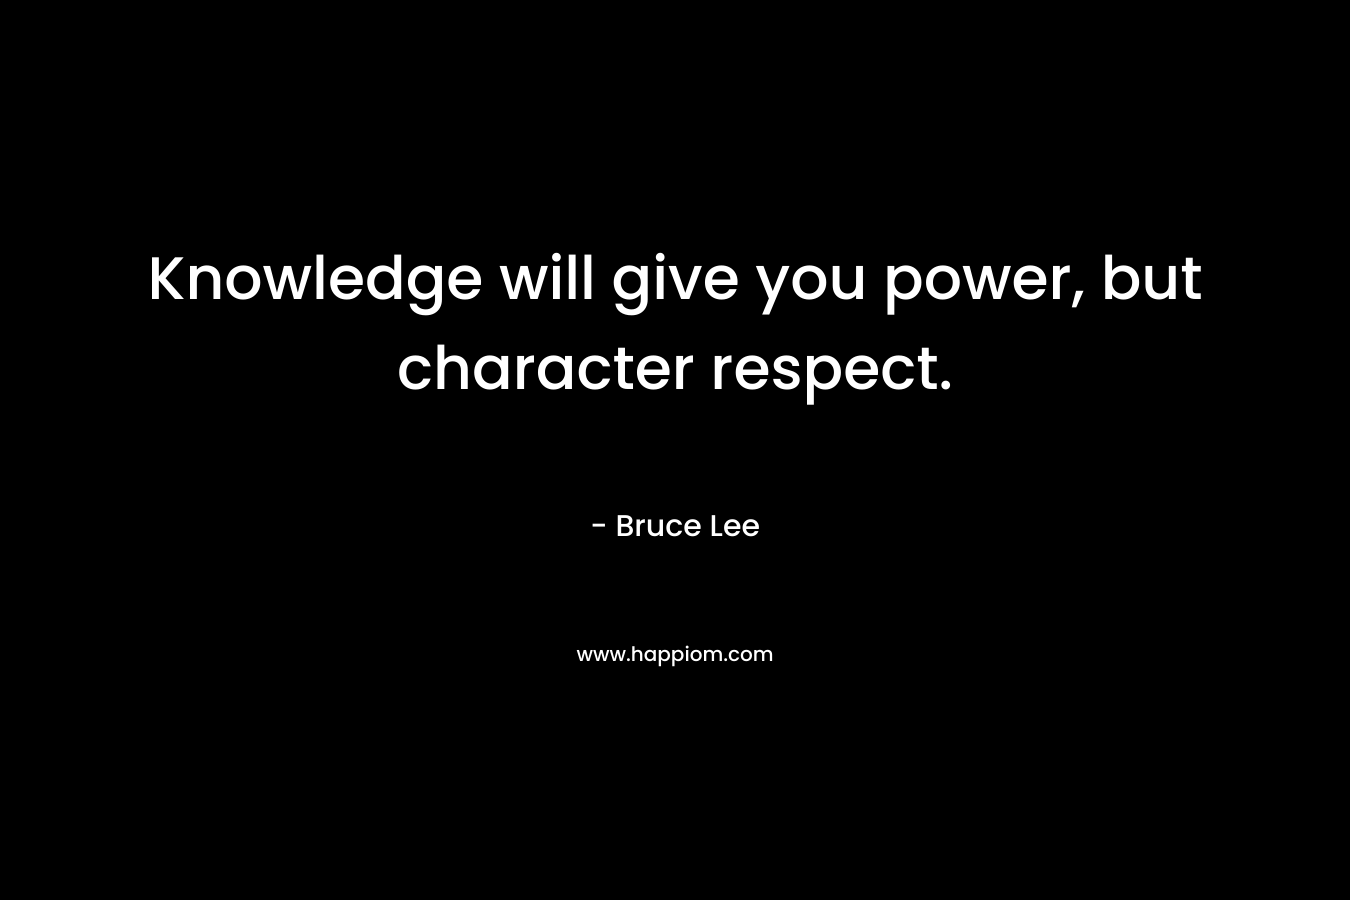 Knowledge will give you power, but character respect. – Bruce Lee